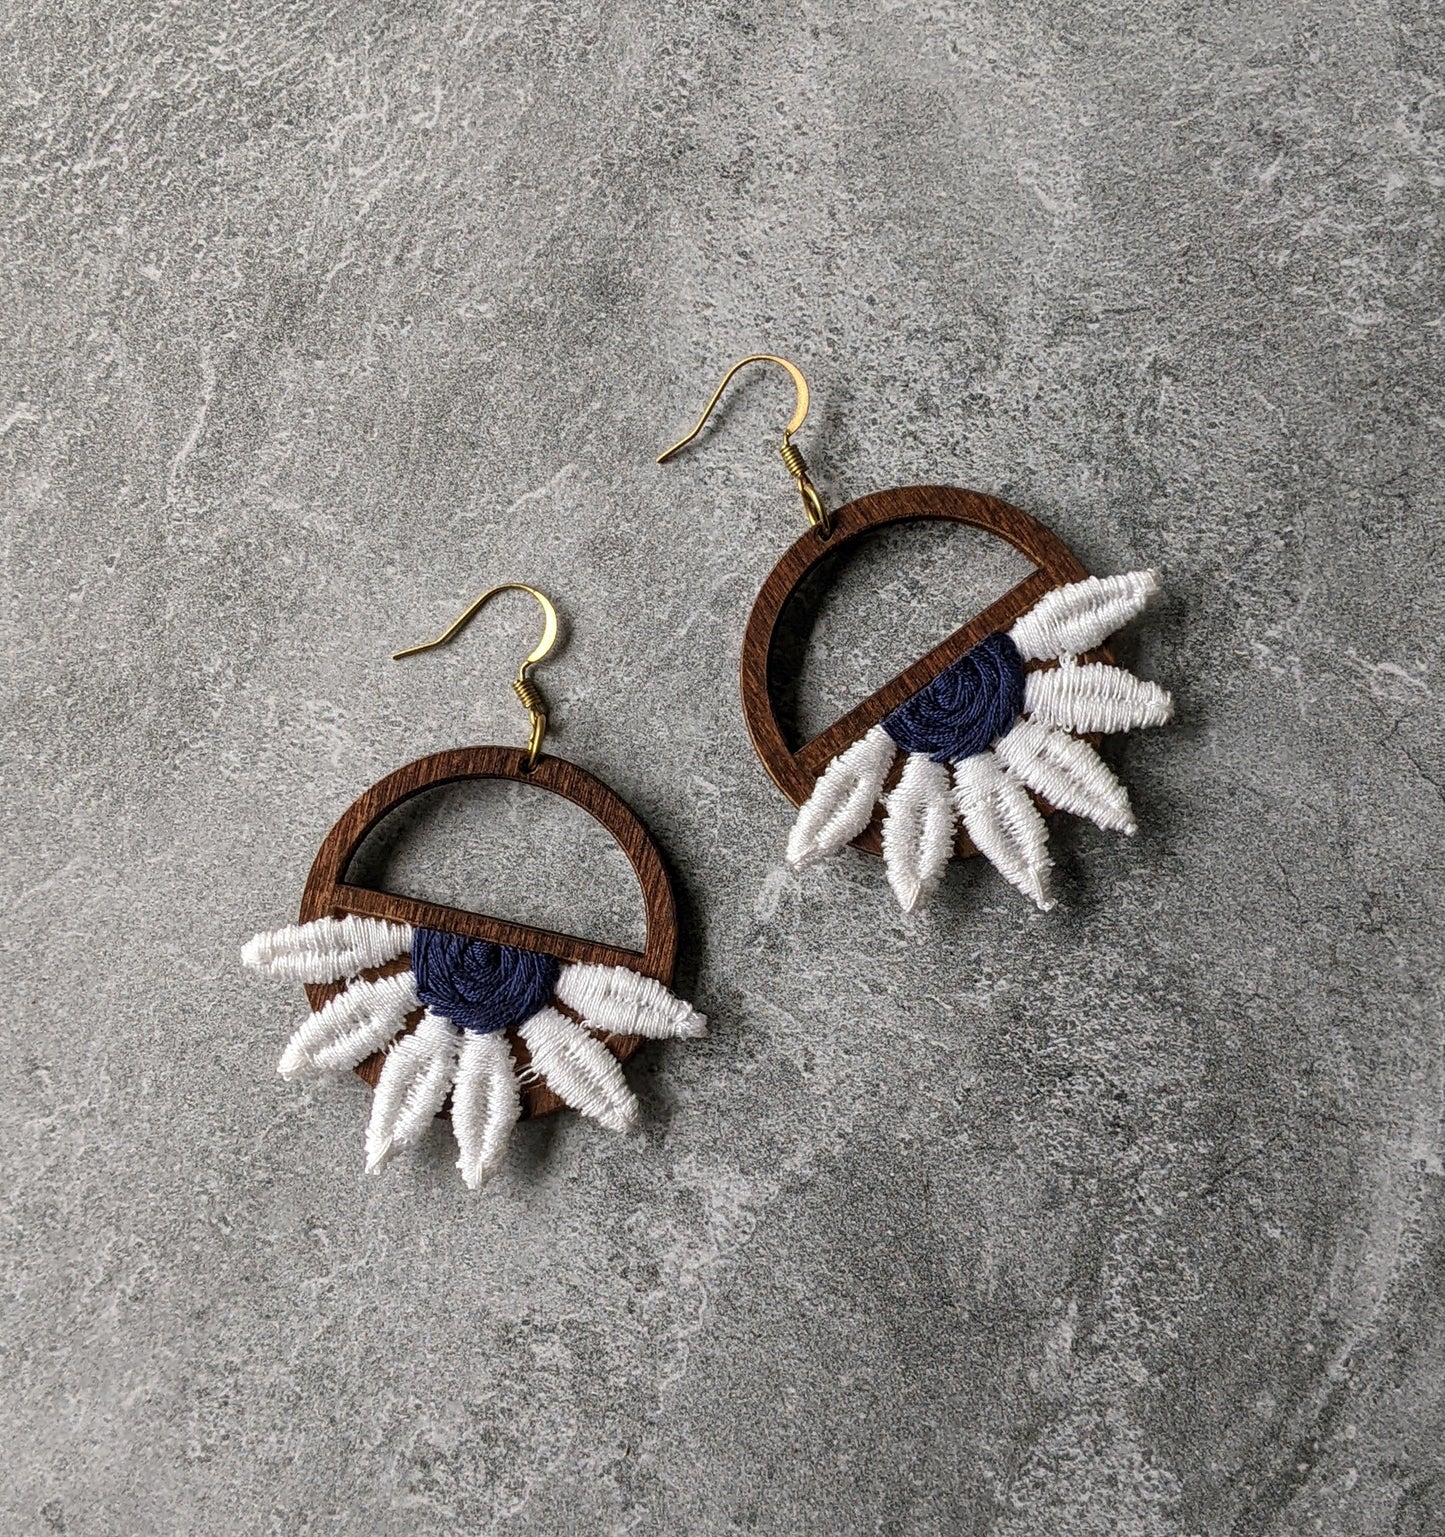 Half Daisy Earrings Made With Vintage 90s Fabric Flowers And Wood Hoops - Navy Blue And White